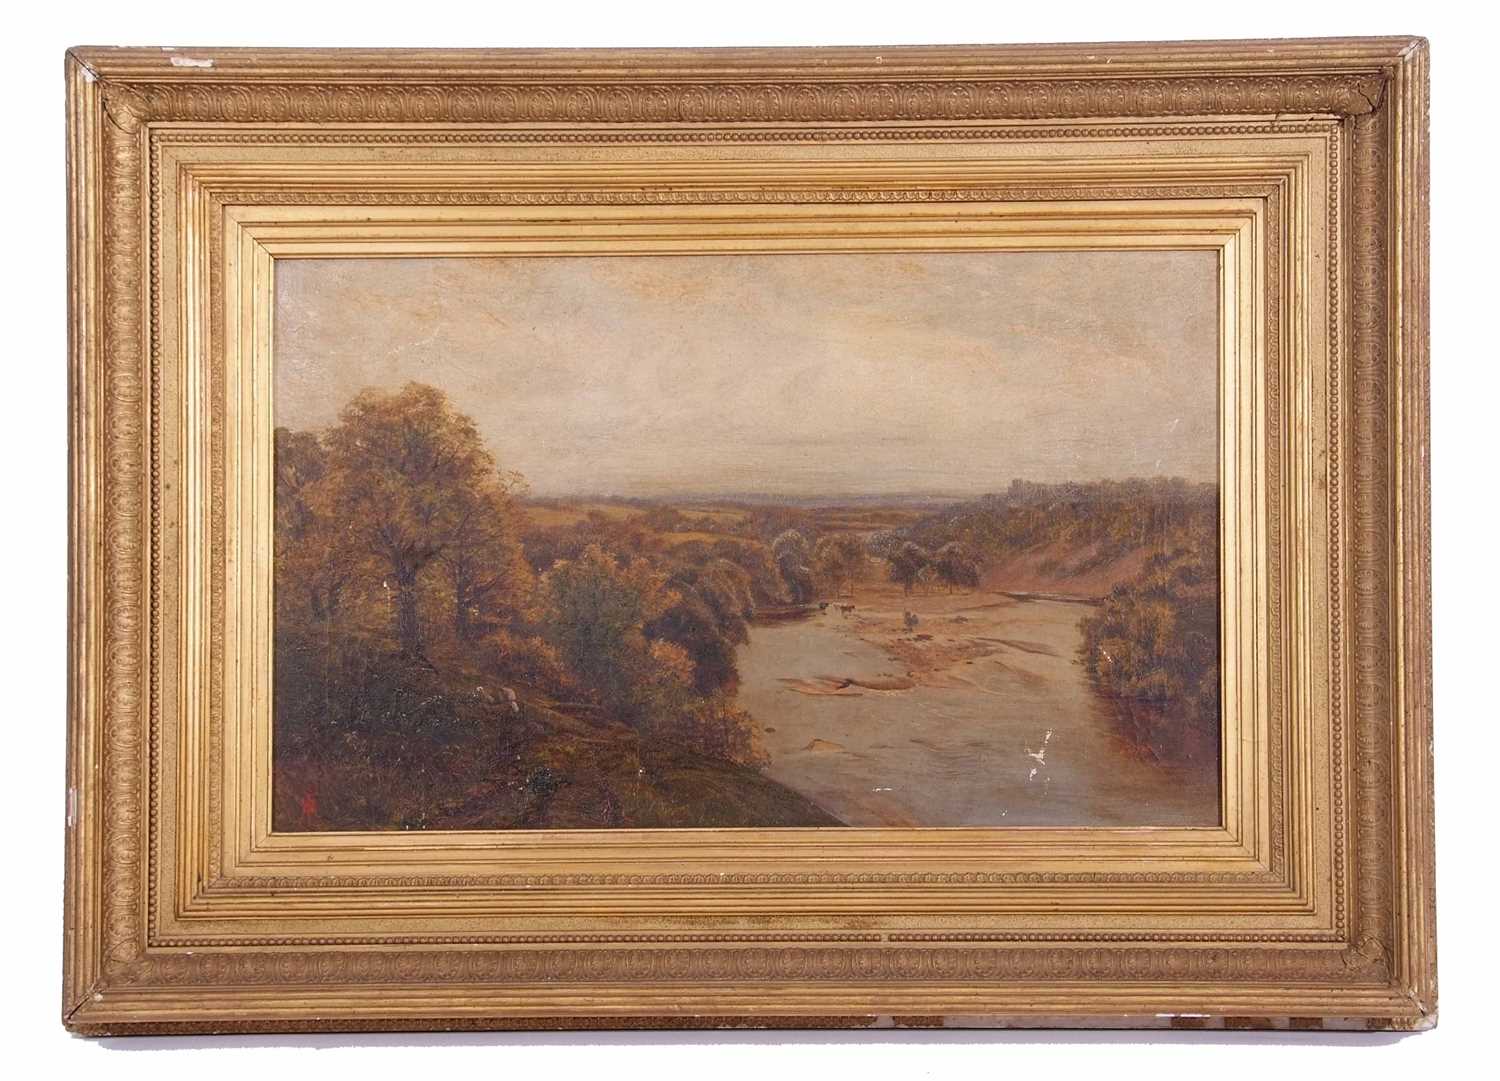 Walter H.W. Foster (British, fl. 1861-1888), Barnard Castle from Rokeby Woods, oil on canvas, - Image 2 of 4